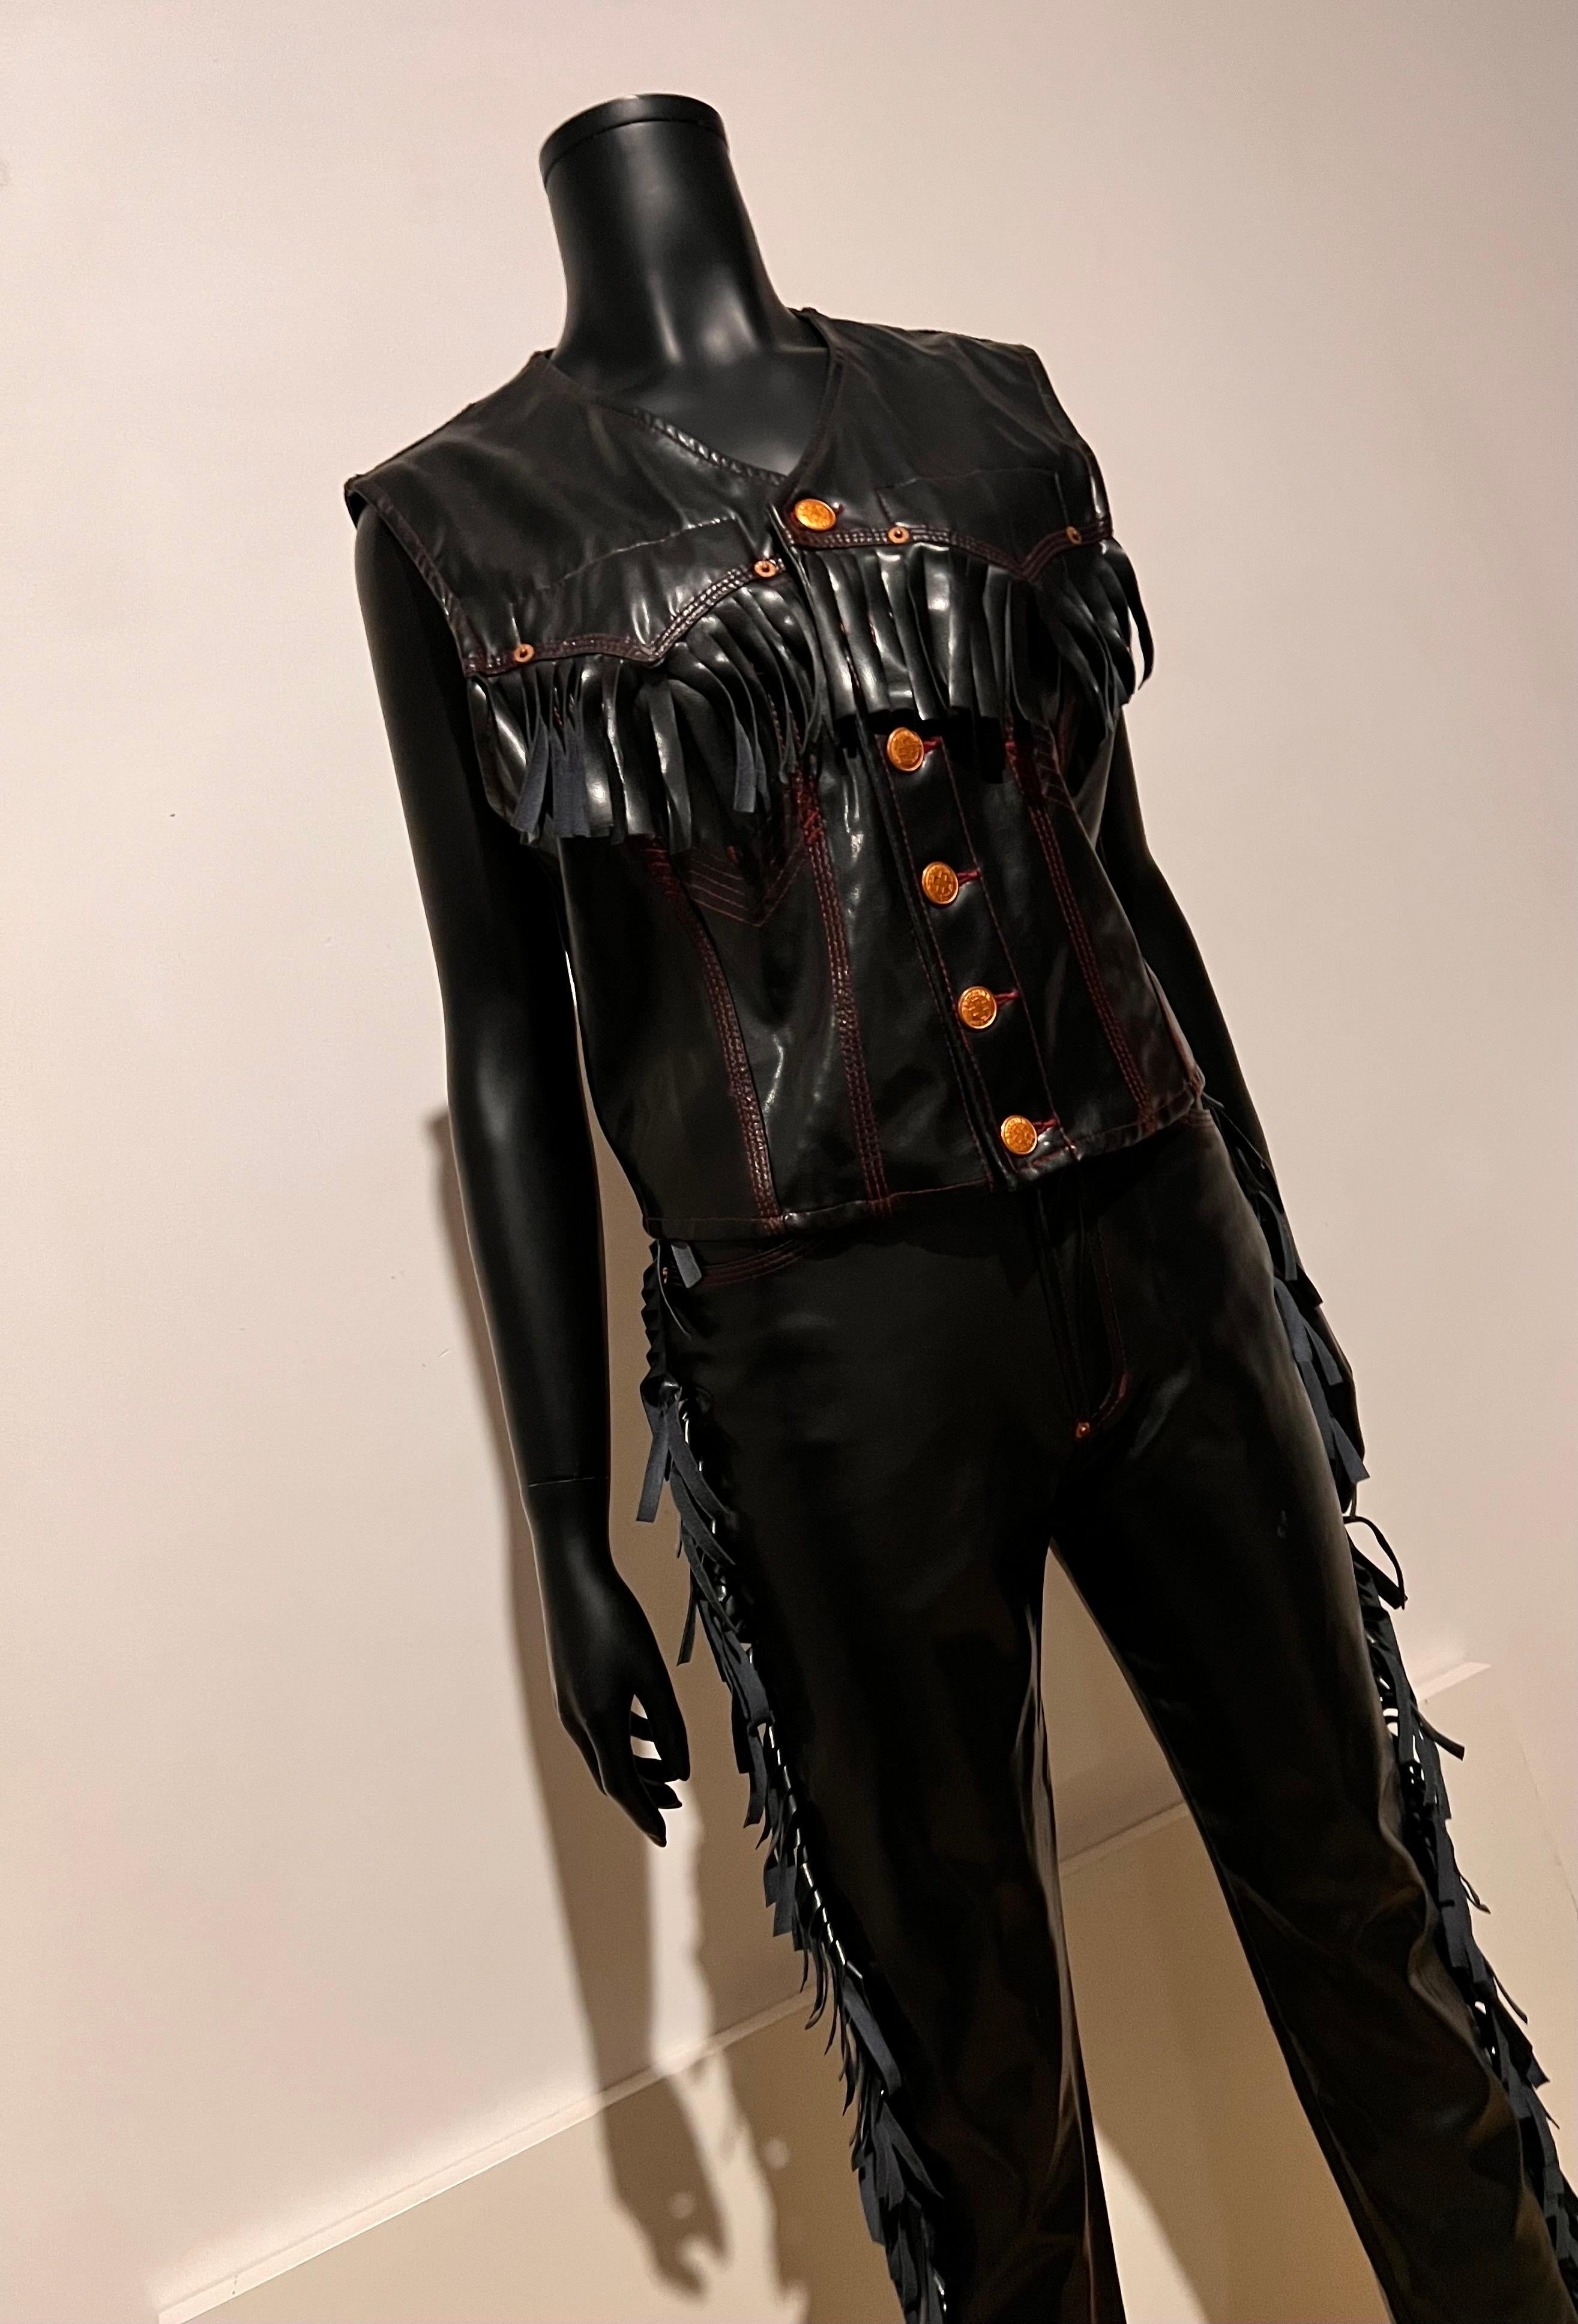 Iconic Jean Paul GAULTIER JEANS Vinyl Fringed Cowboy Western Pants and Vest.

A special piece of JPG that is truly a gender neutral garment.

Gaultier Jeans black vinyl cowboy vest and pants ensemble features fringed detail, red topstitching, and